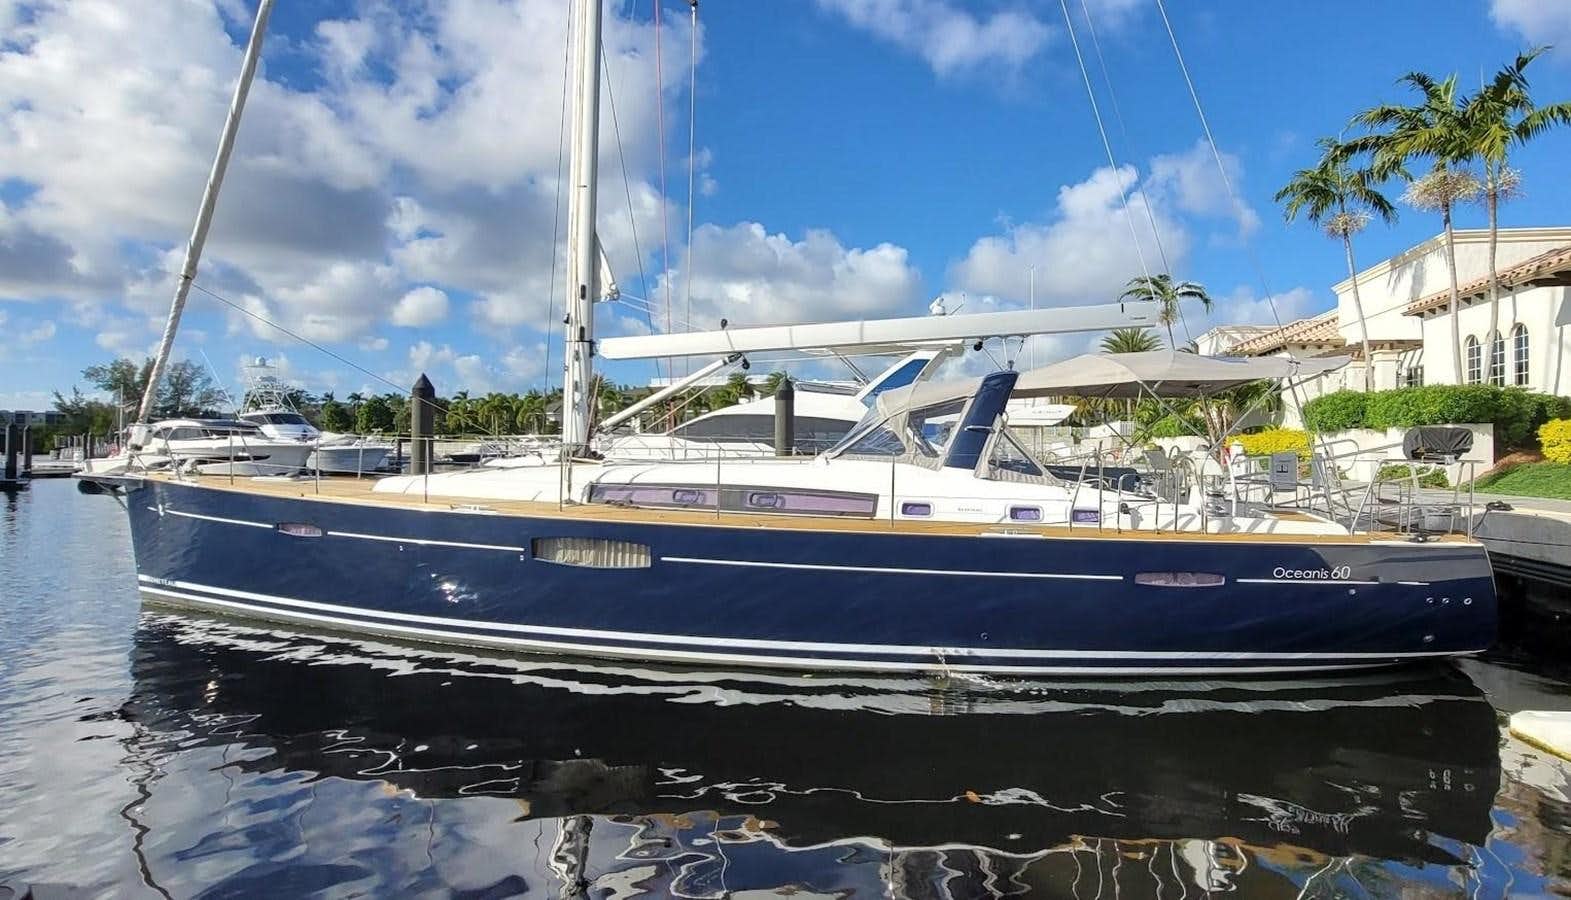 Blue pearl
Yacht for Sale